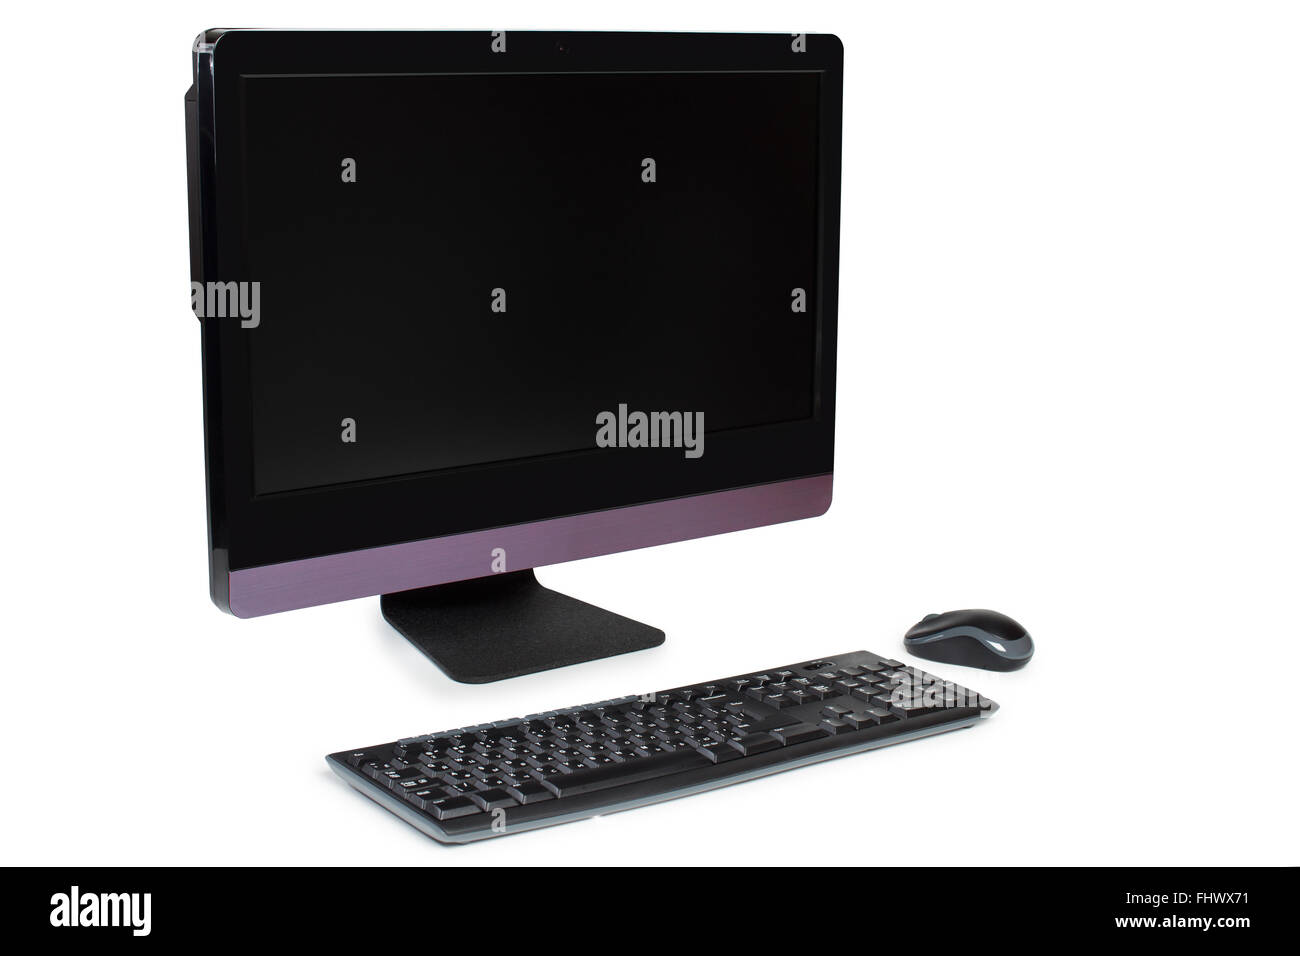 Contemporary all in one desktop office computer. Personal computer with blank display keyboard and mouse isolated on white Stock Photo